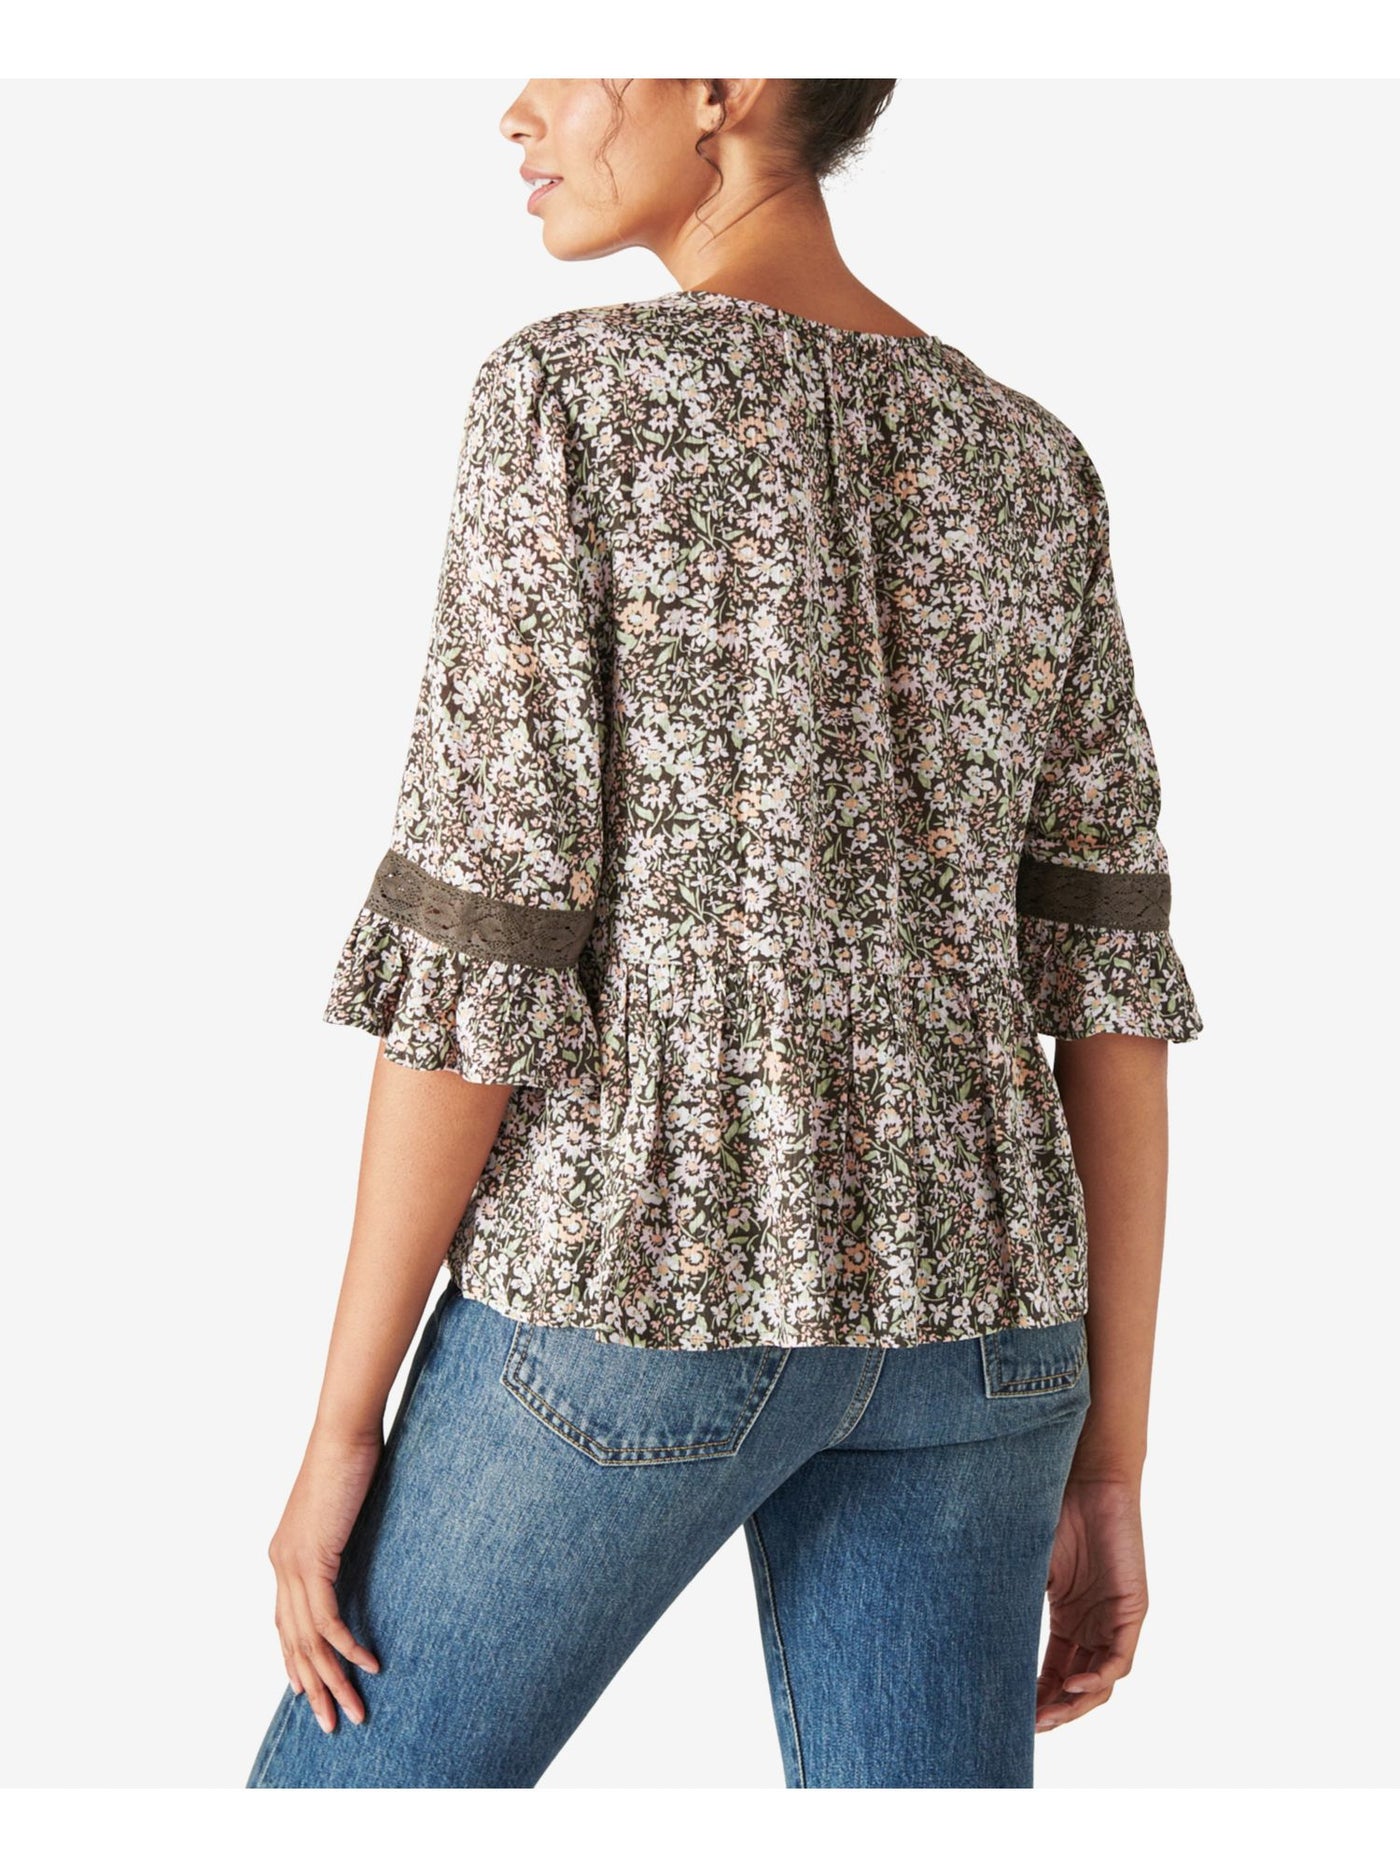 LUCKY BRAND Womens Brown Floral Elbow Sleeve V Neck Peplum Top S